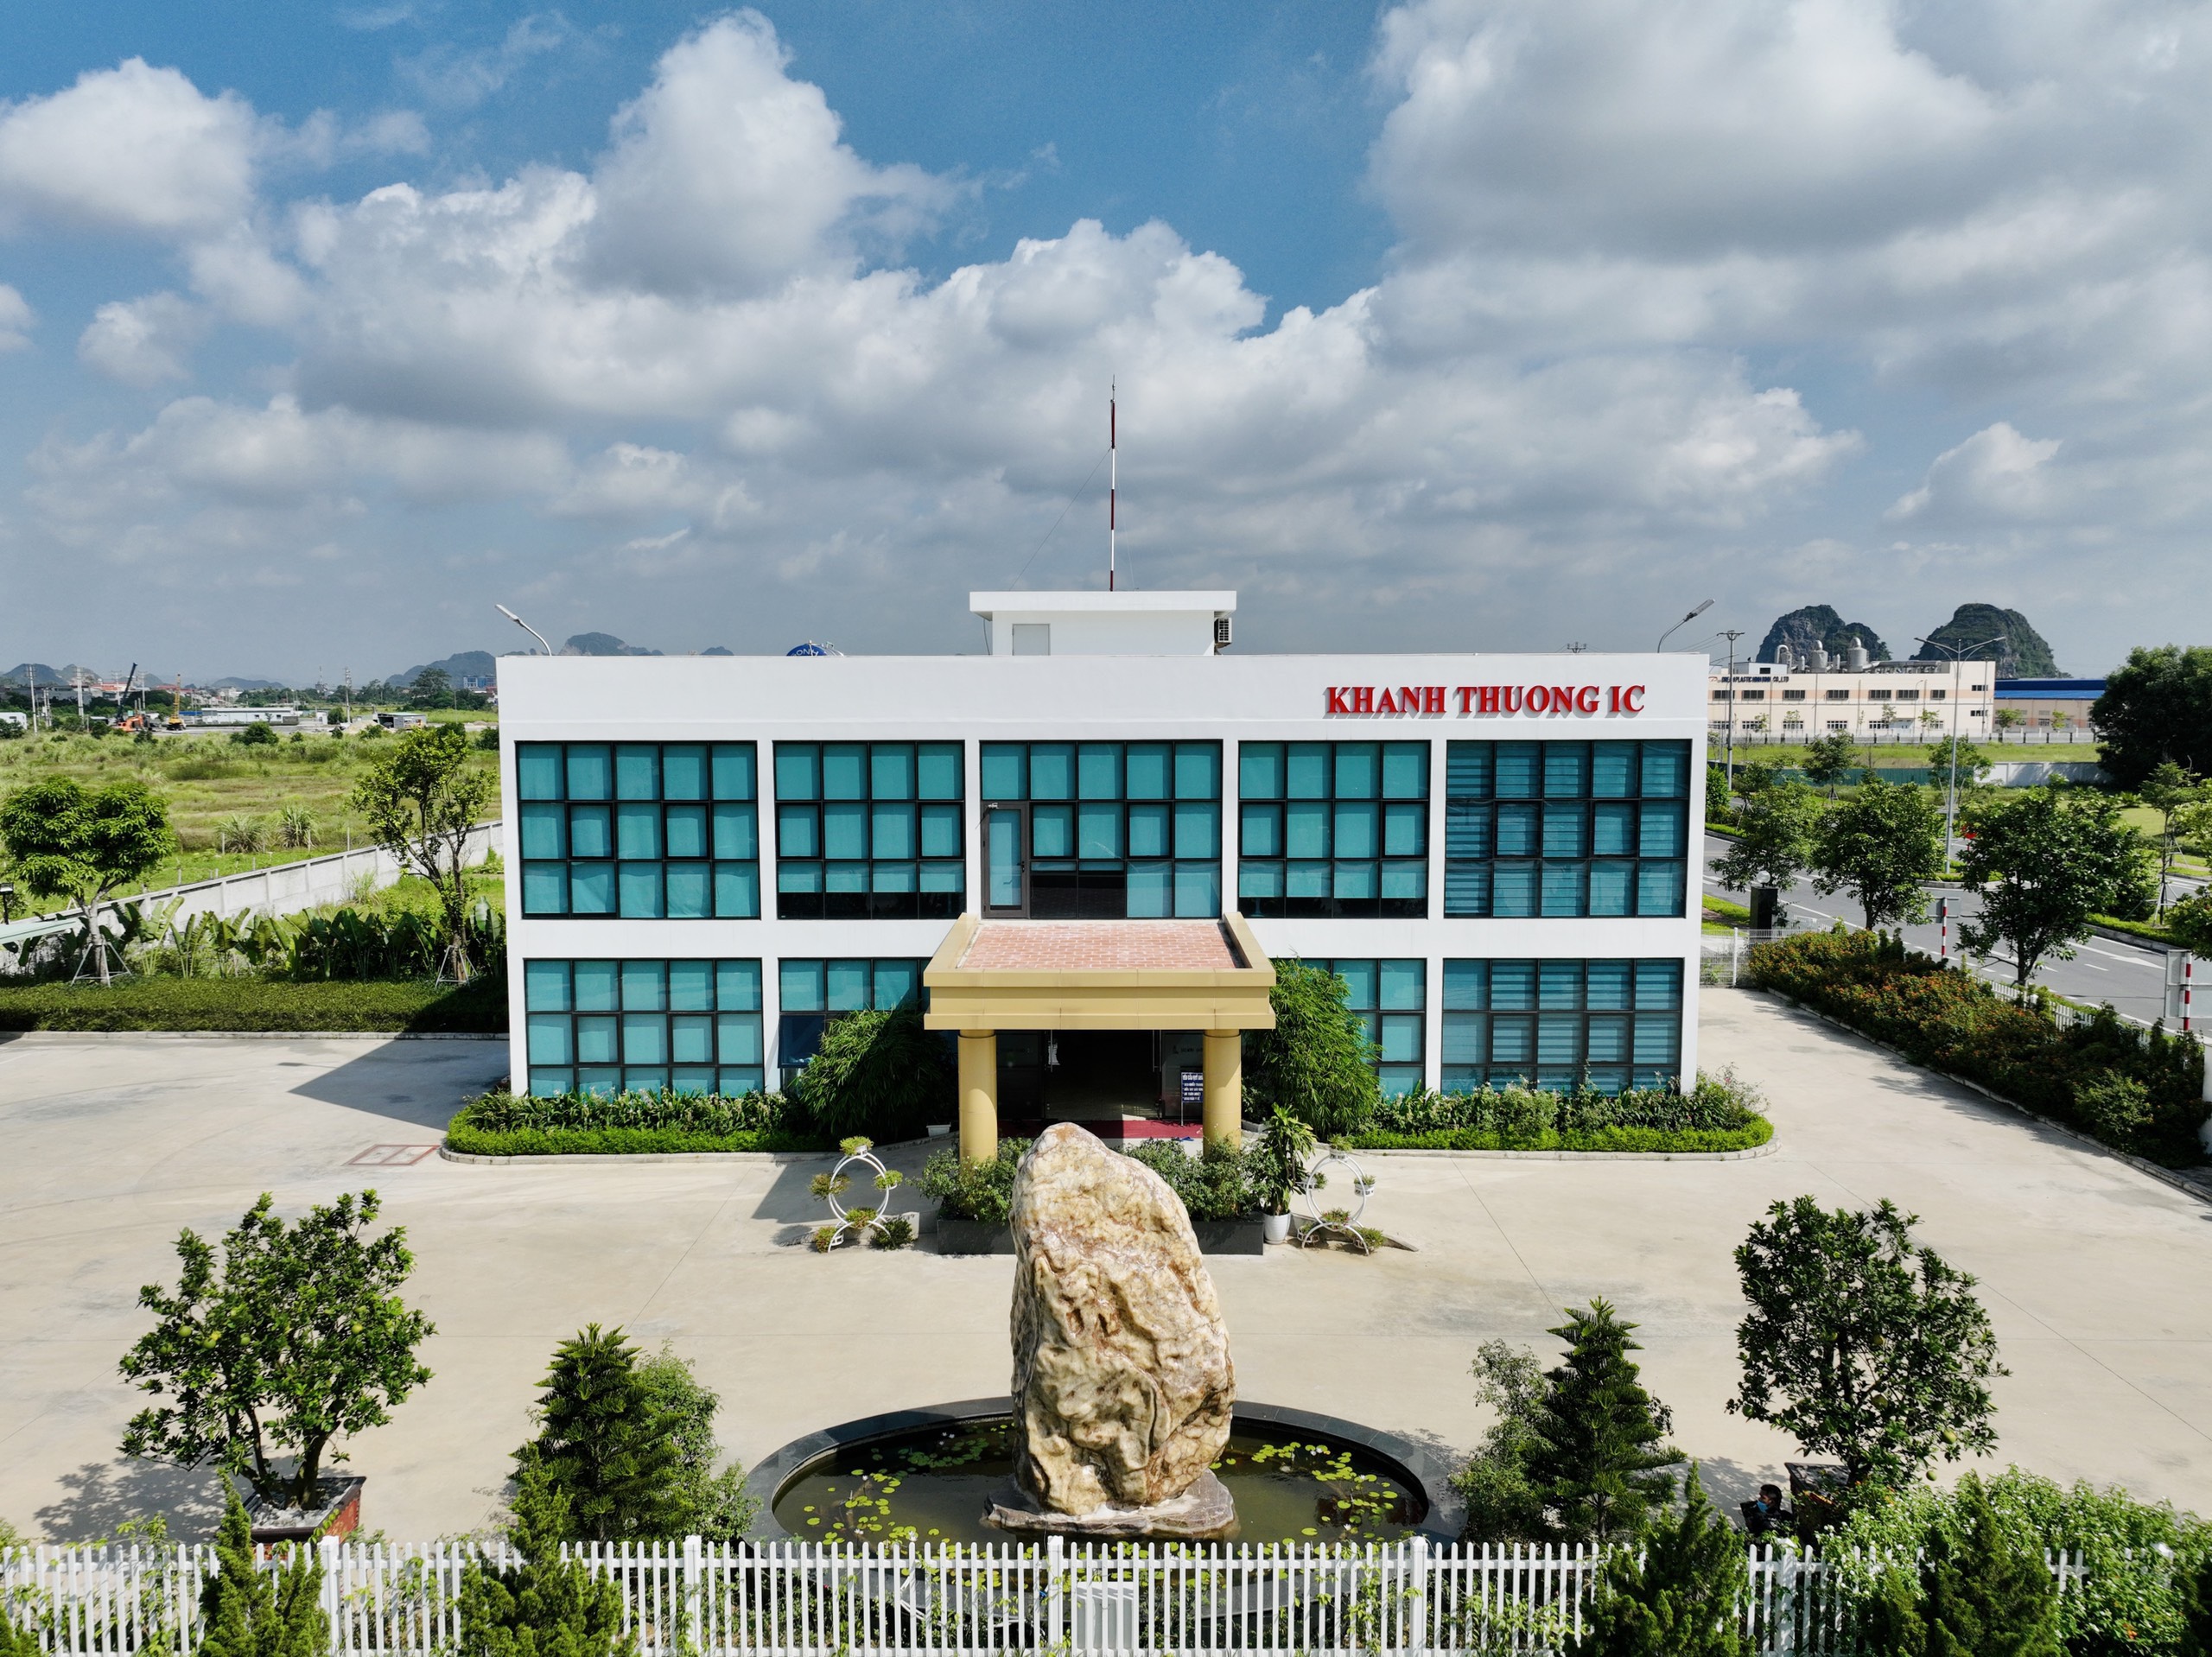 Khanh Thuong Industrial Cluster